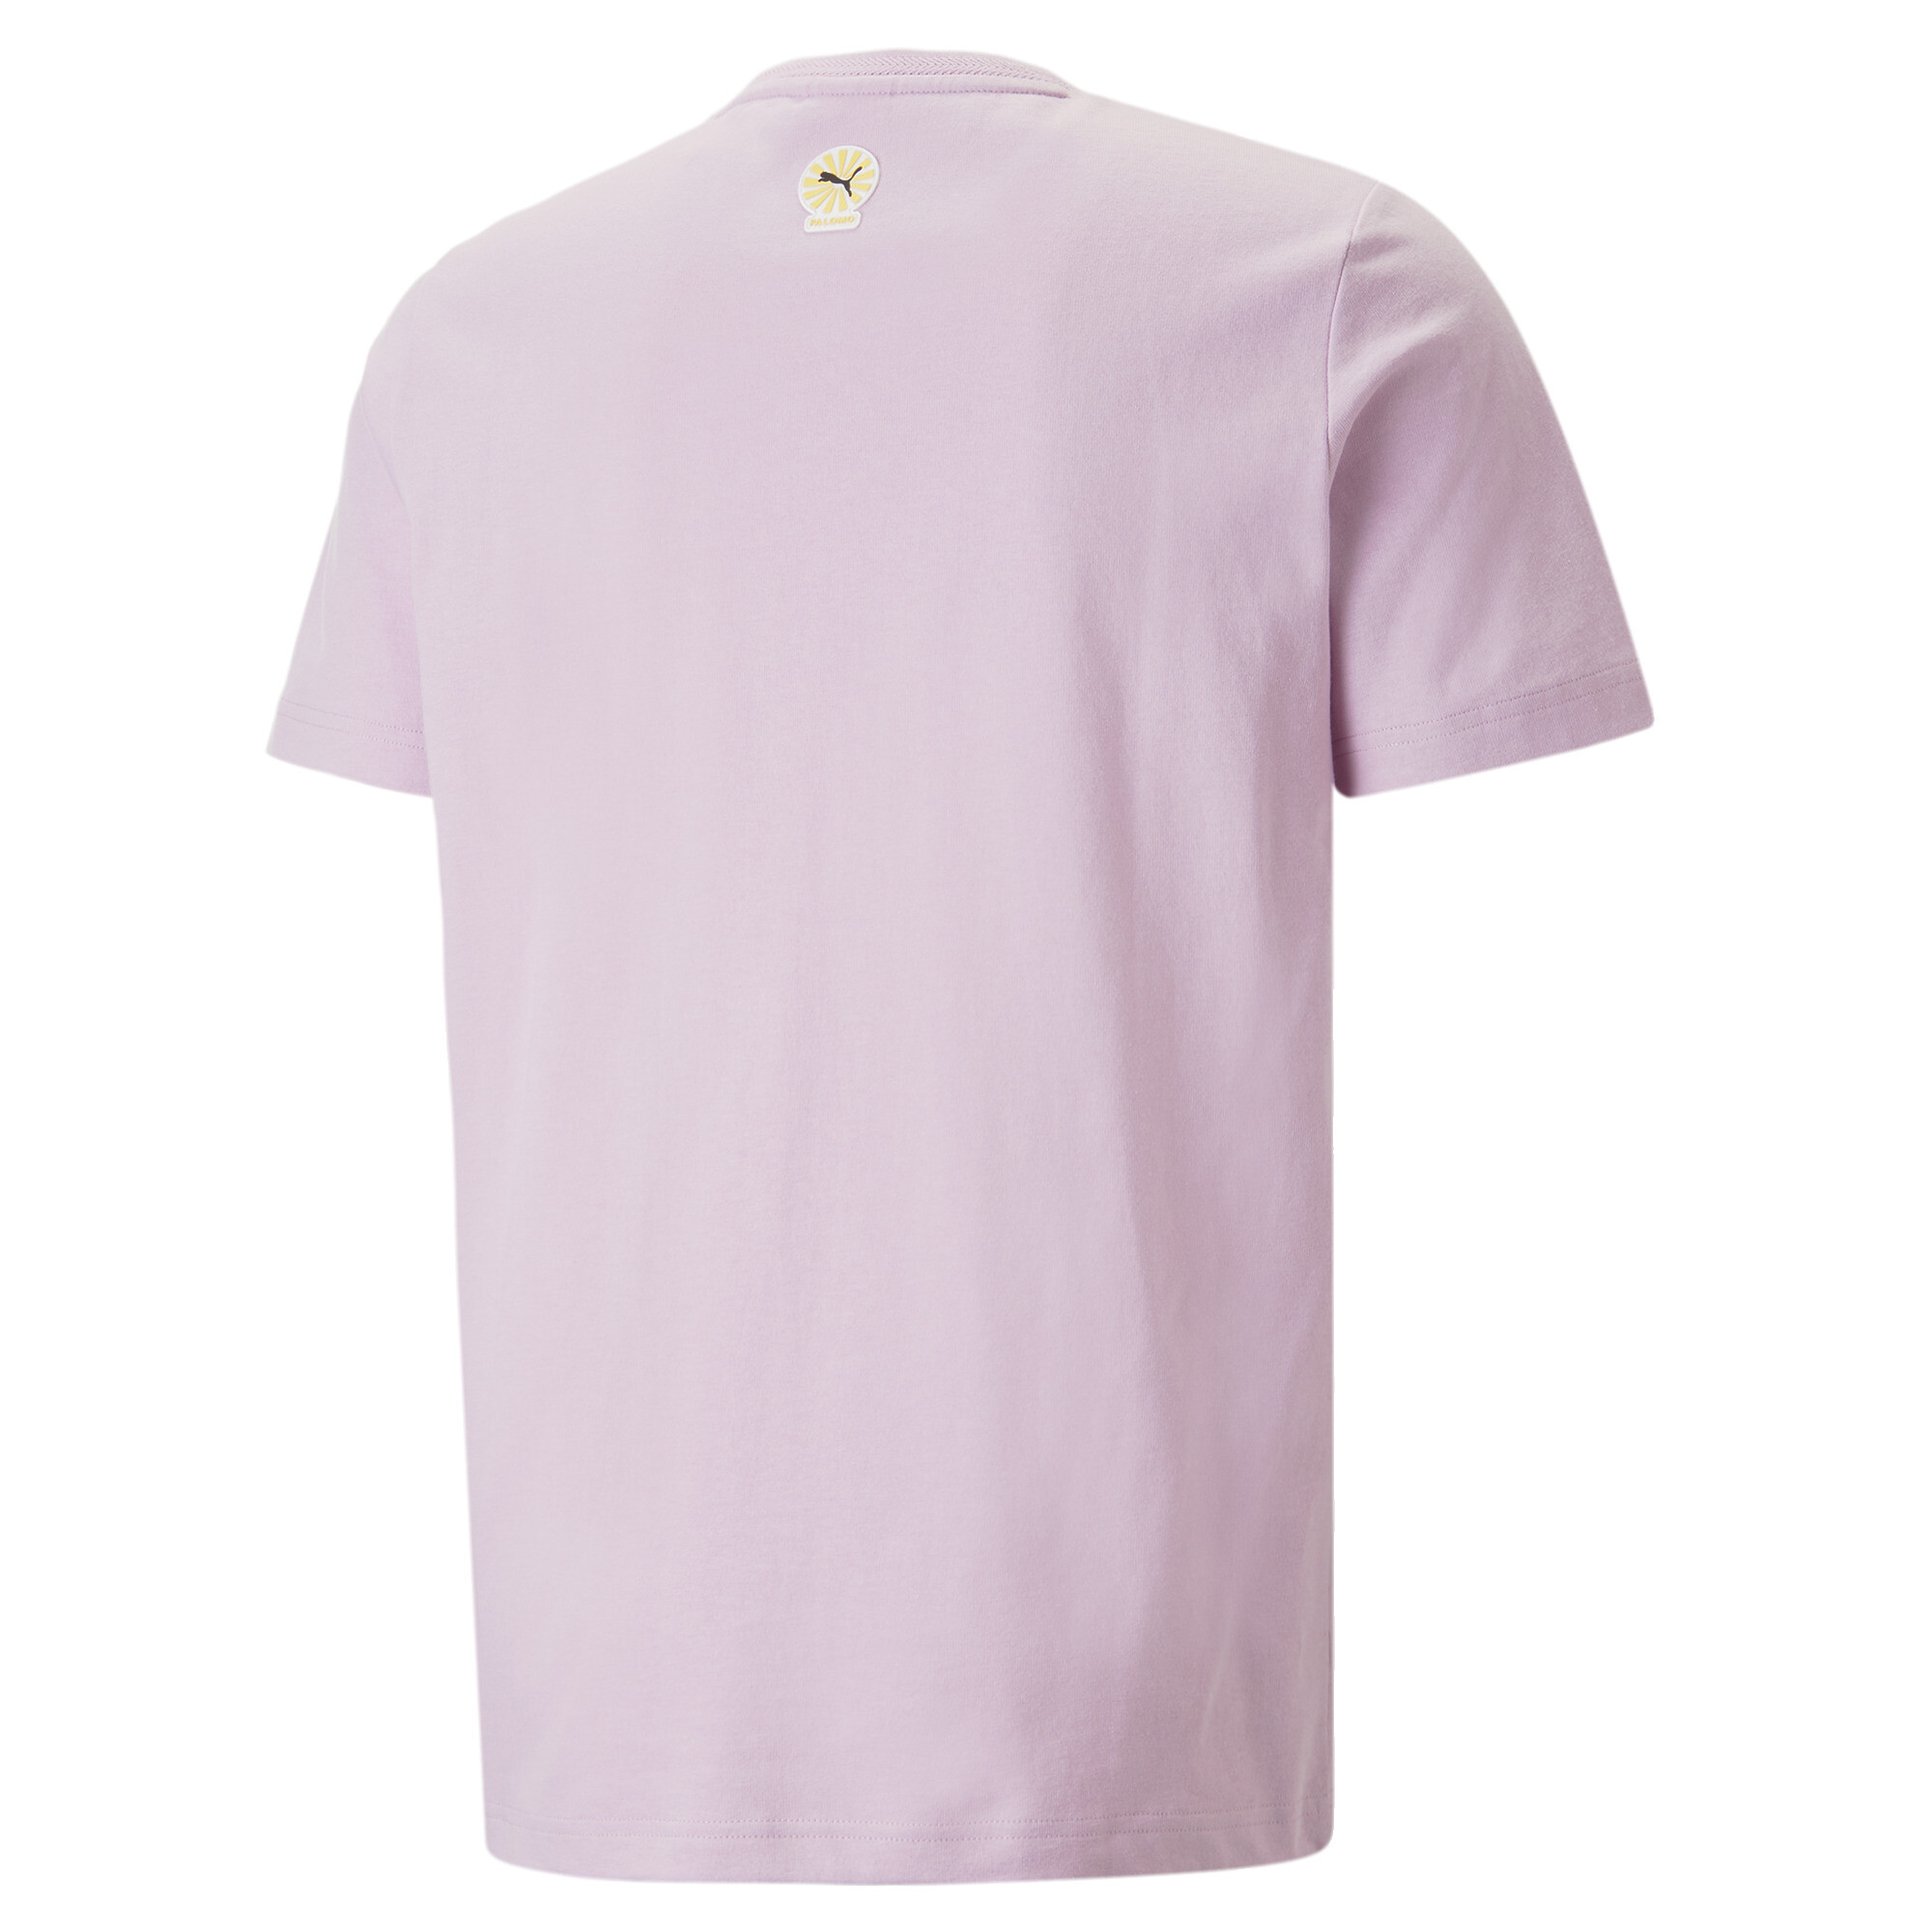 Men's PUMA X PALOMO Graphic T-Shirt In 70 - Pink, Size Small